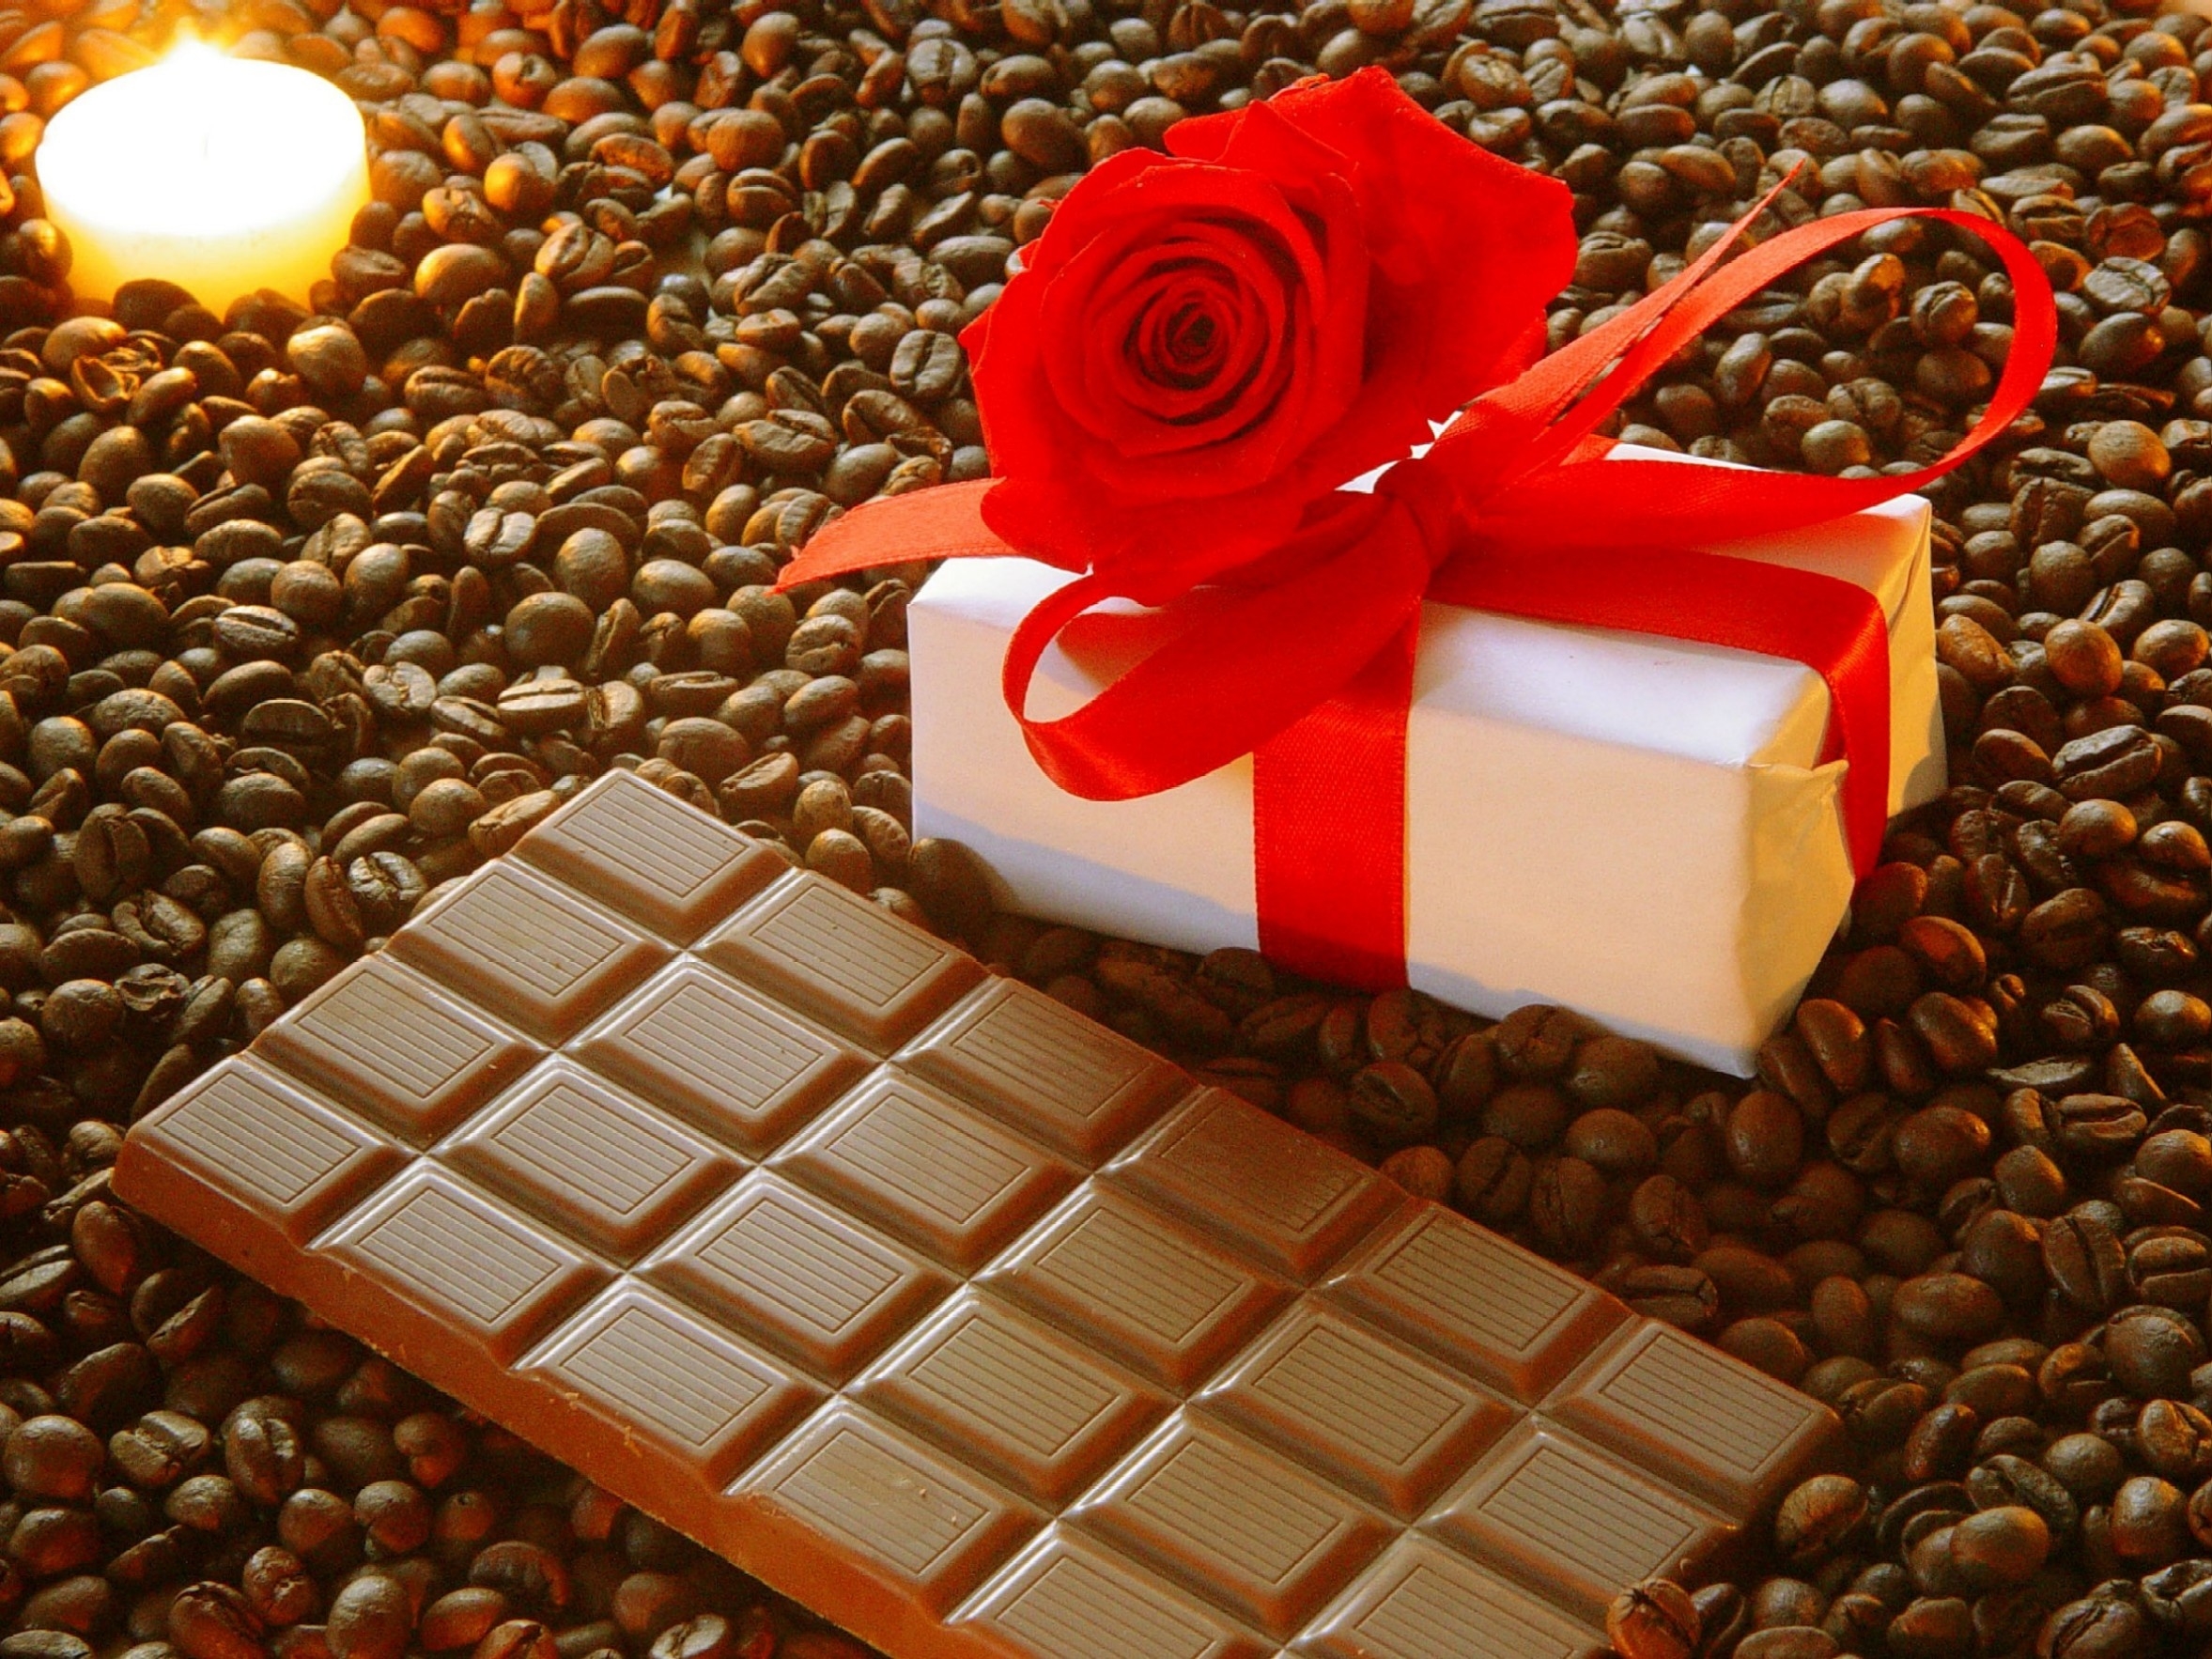 Mobile wallpaper romance, rose flower, food, chocolate, coffee, rose, holiday, present, gift, bow, grains, candle, grain